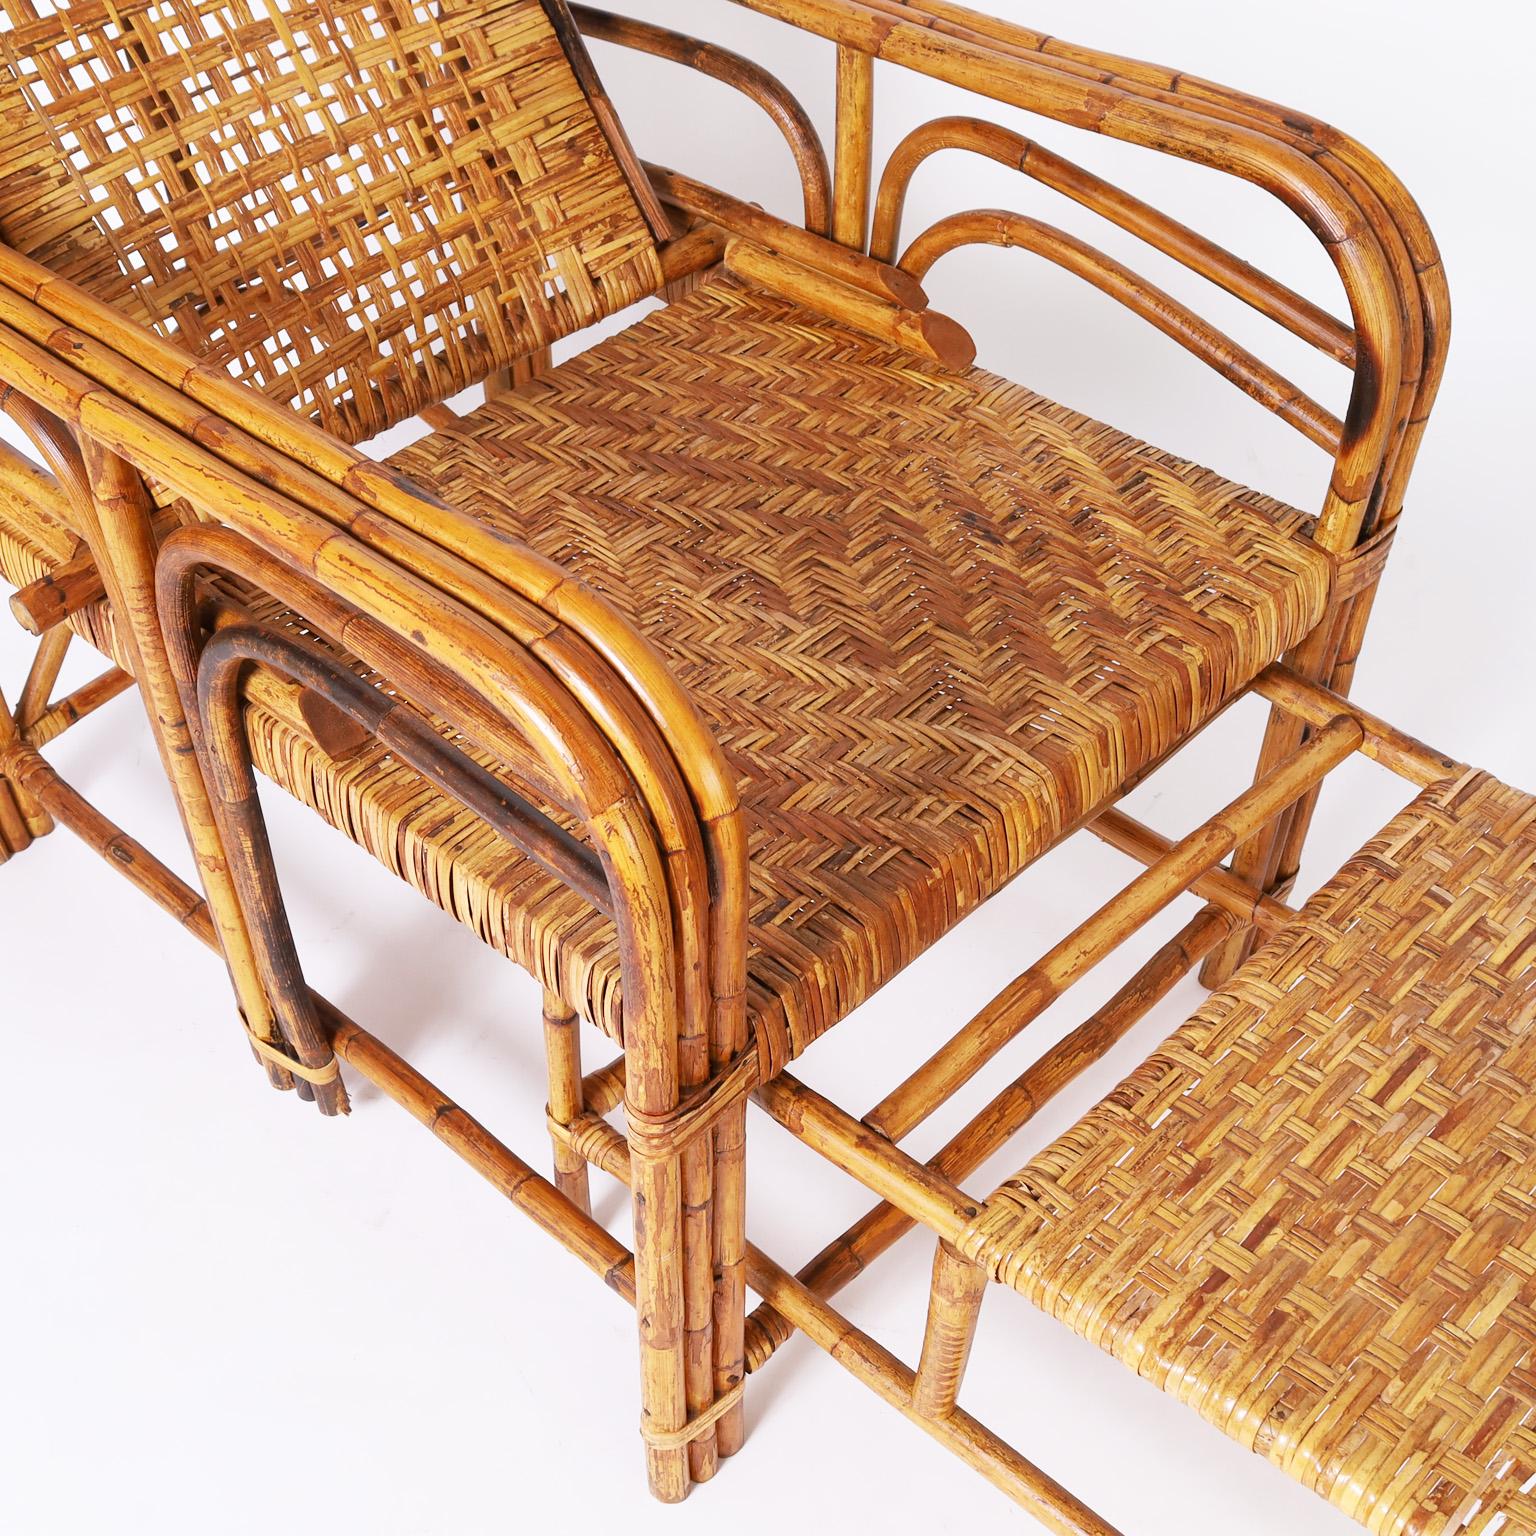 British Colonial Style Bamboo Recliner Chair with Ottoman In Good Condition For Sale In Palm Beach, FL